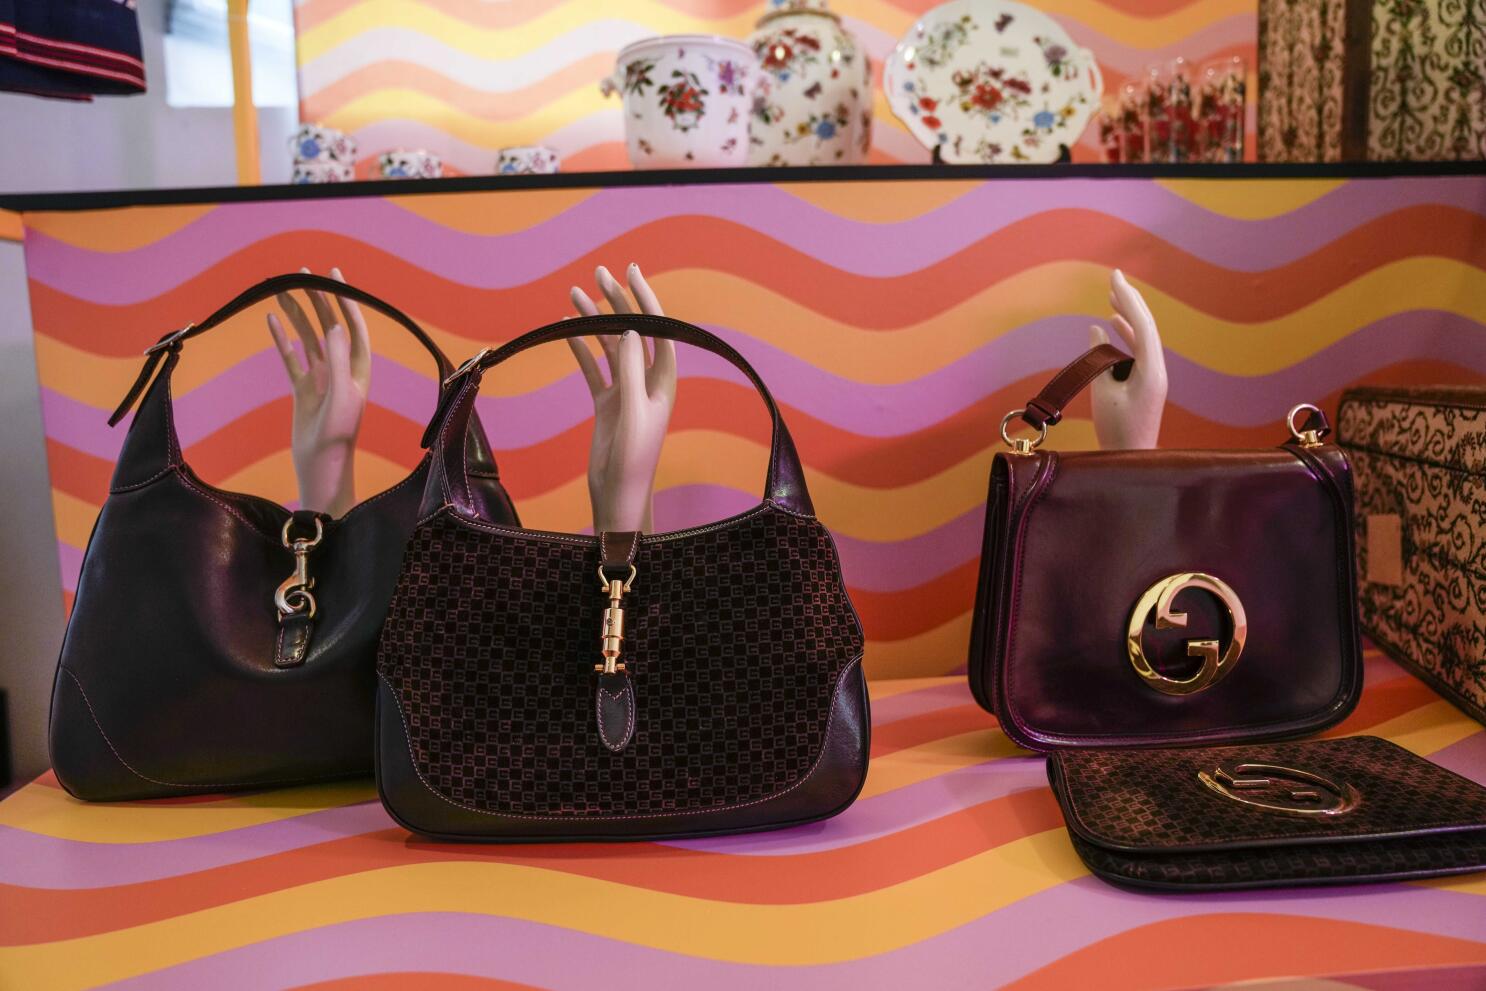 Gucci launches Vault vintage site during Milan Fashion Week - The